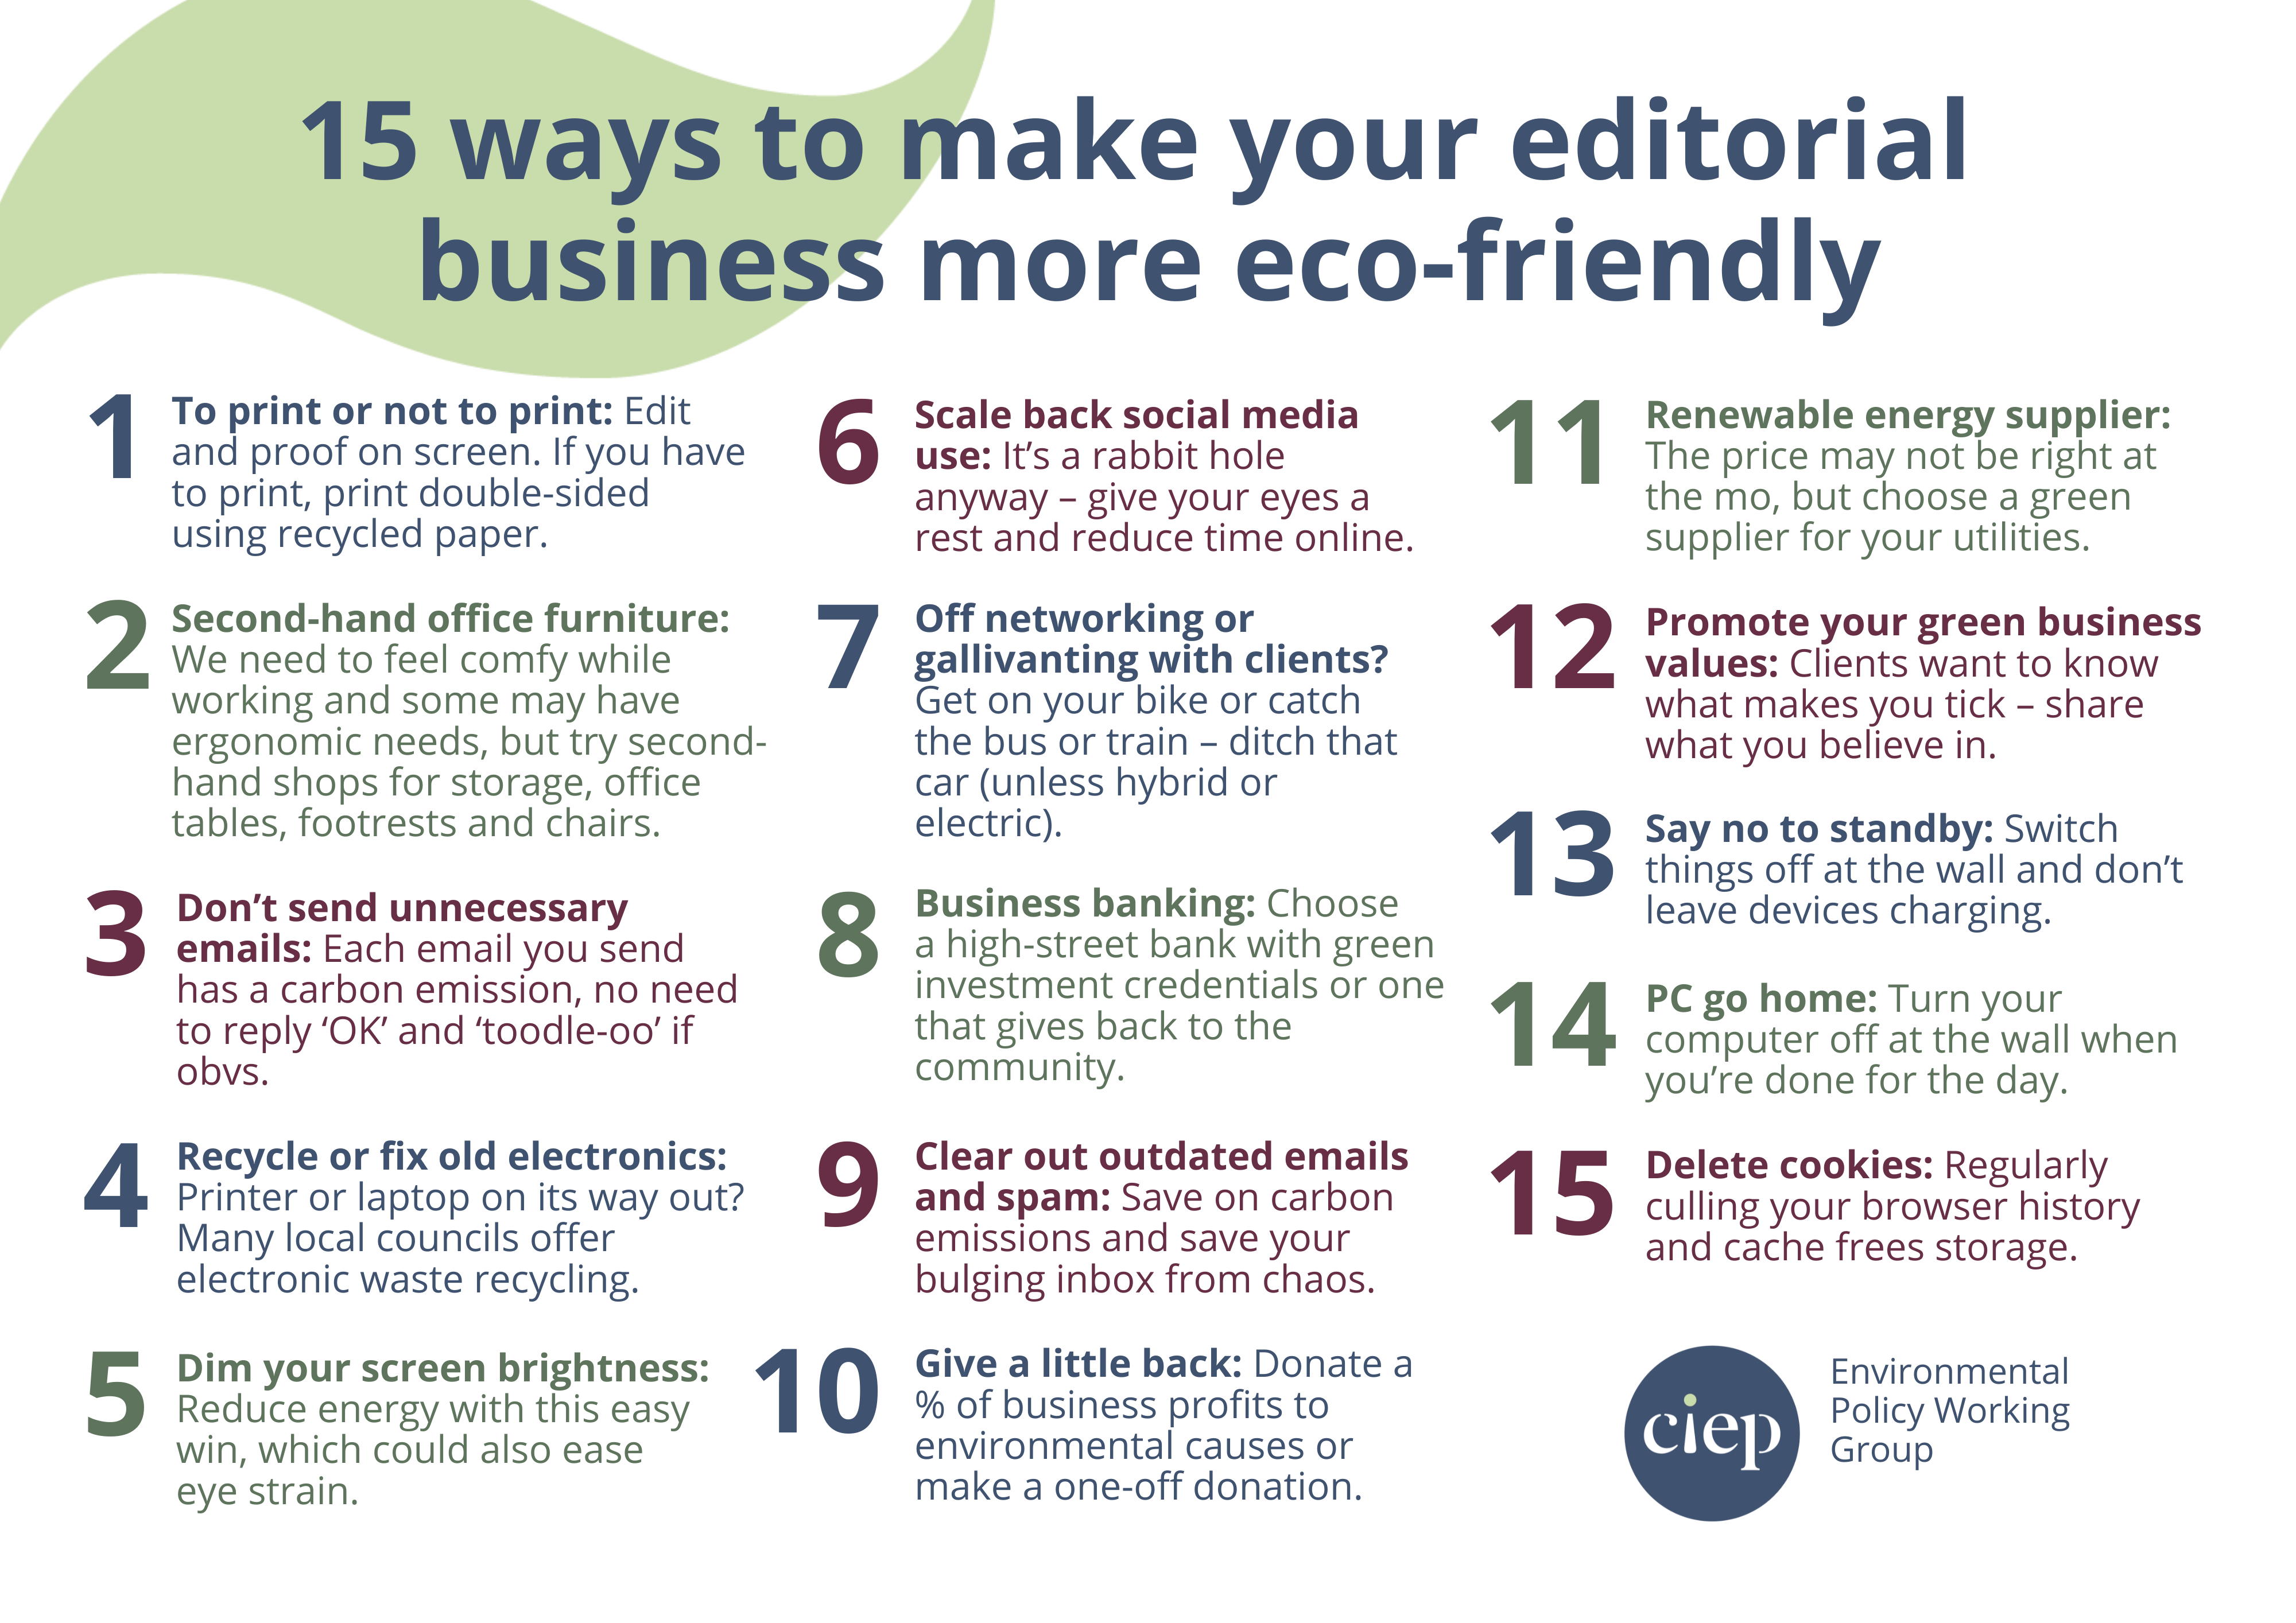 15 ways to make your editorial business more eco-friendly